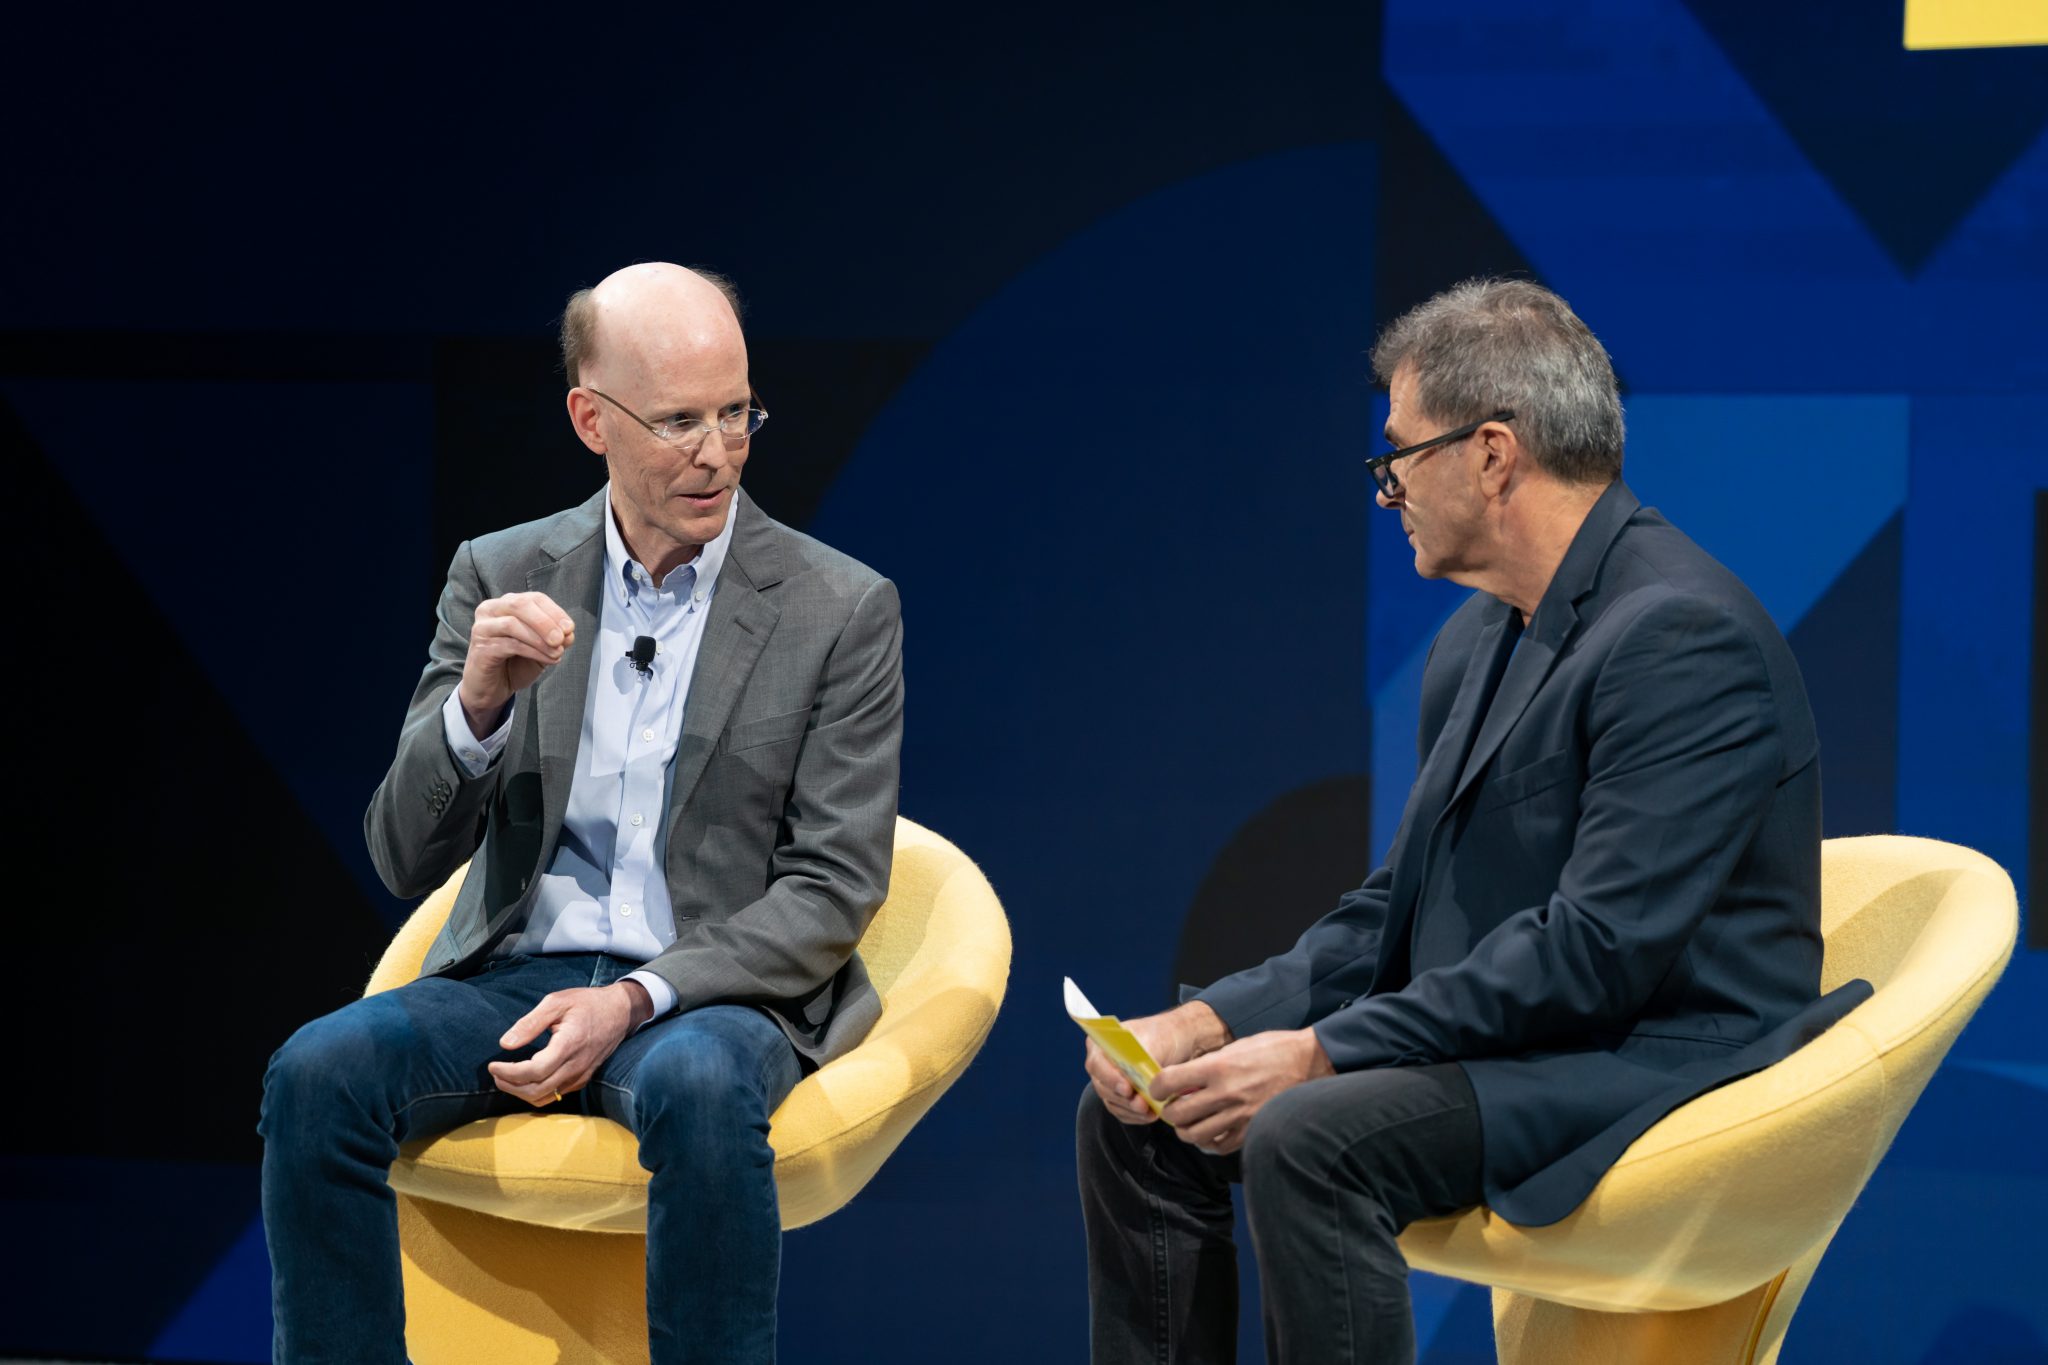 Google's head of travel Richard Holden with Skift executive editor Dennis Schaal at Skift Global Forum on September 20, 2022 in New York City.